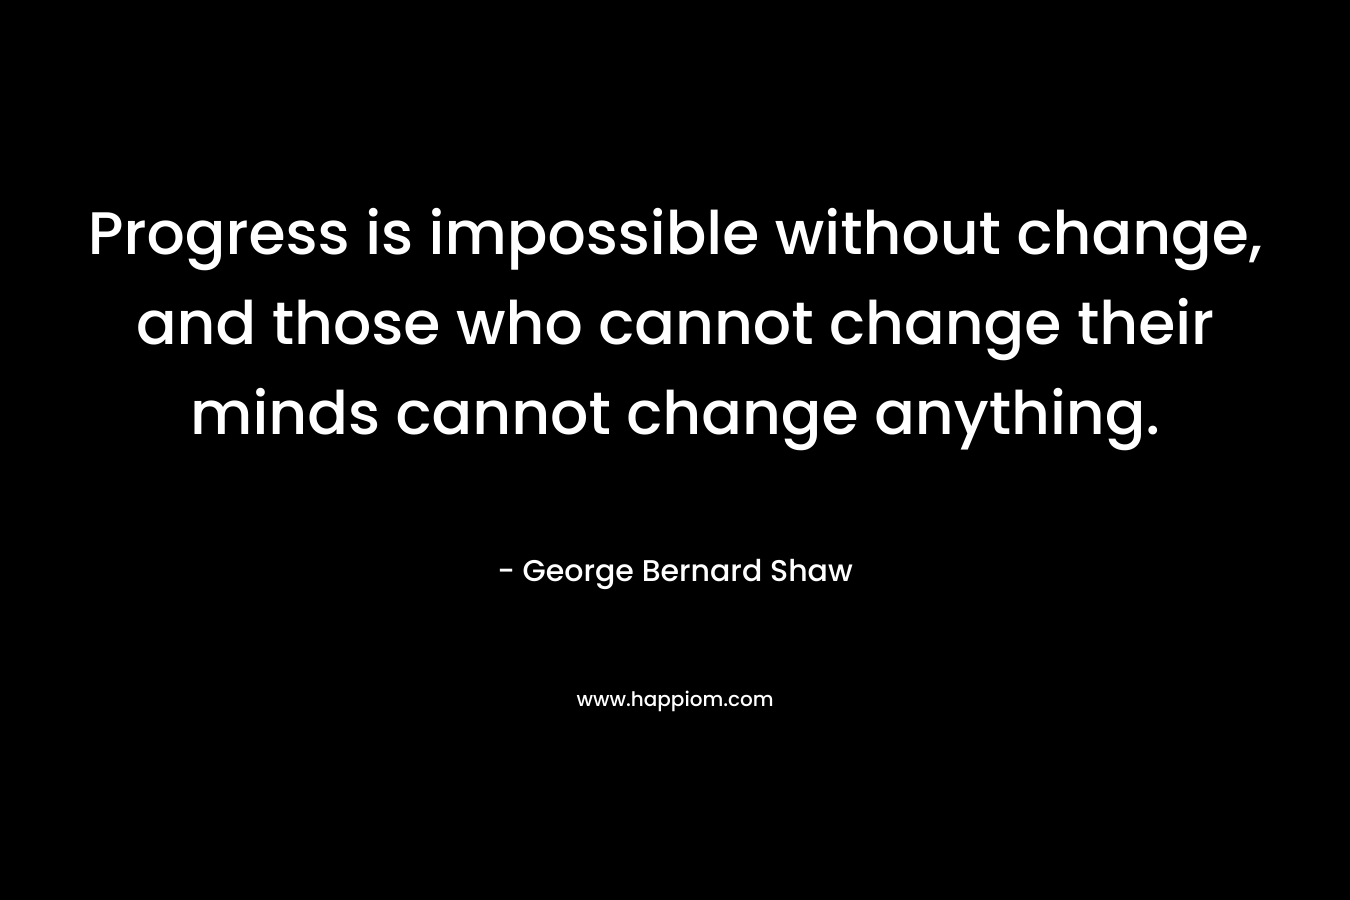 Progress is impossible without change, and those who cannot change their minds cannot change anything. – George Bernard Shaw